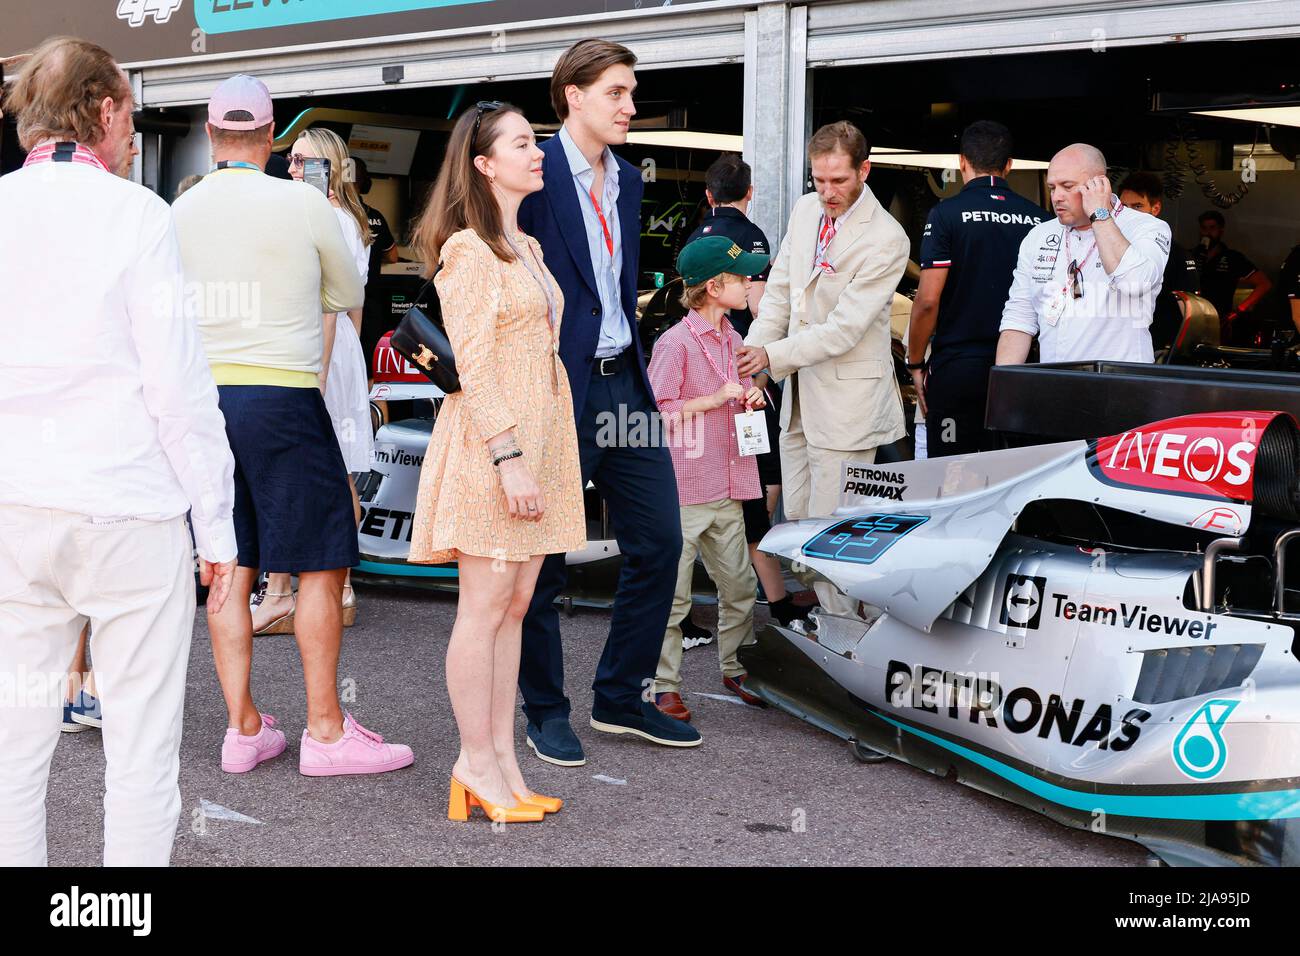 Princess Alexandra of Hanover and Ben-Sylvester Strautmann are spotted during the F1 Gran Prix of Monaco on May 28, 2022 in Principality of Monaco. Photo by Marco Piovanotto/ABACAPRESS.COM Stock Photo